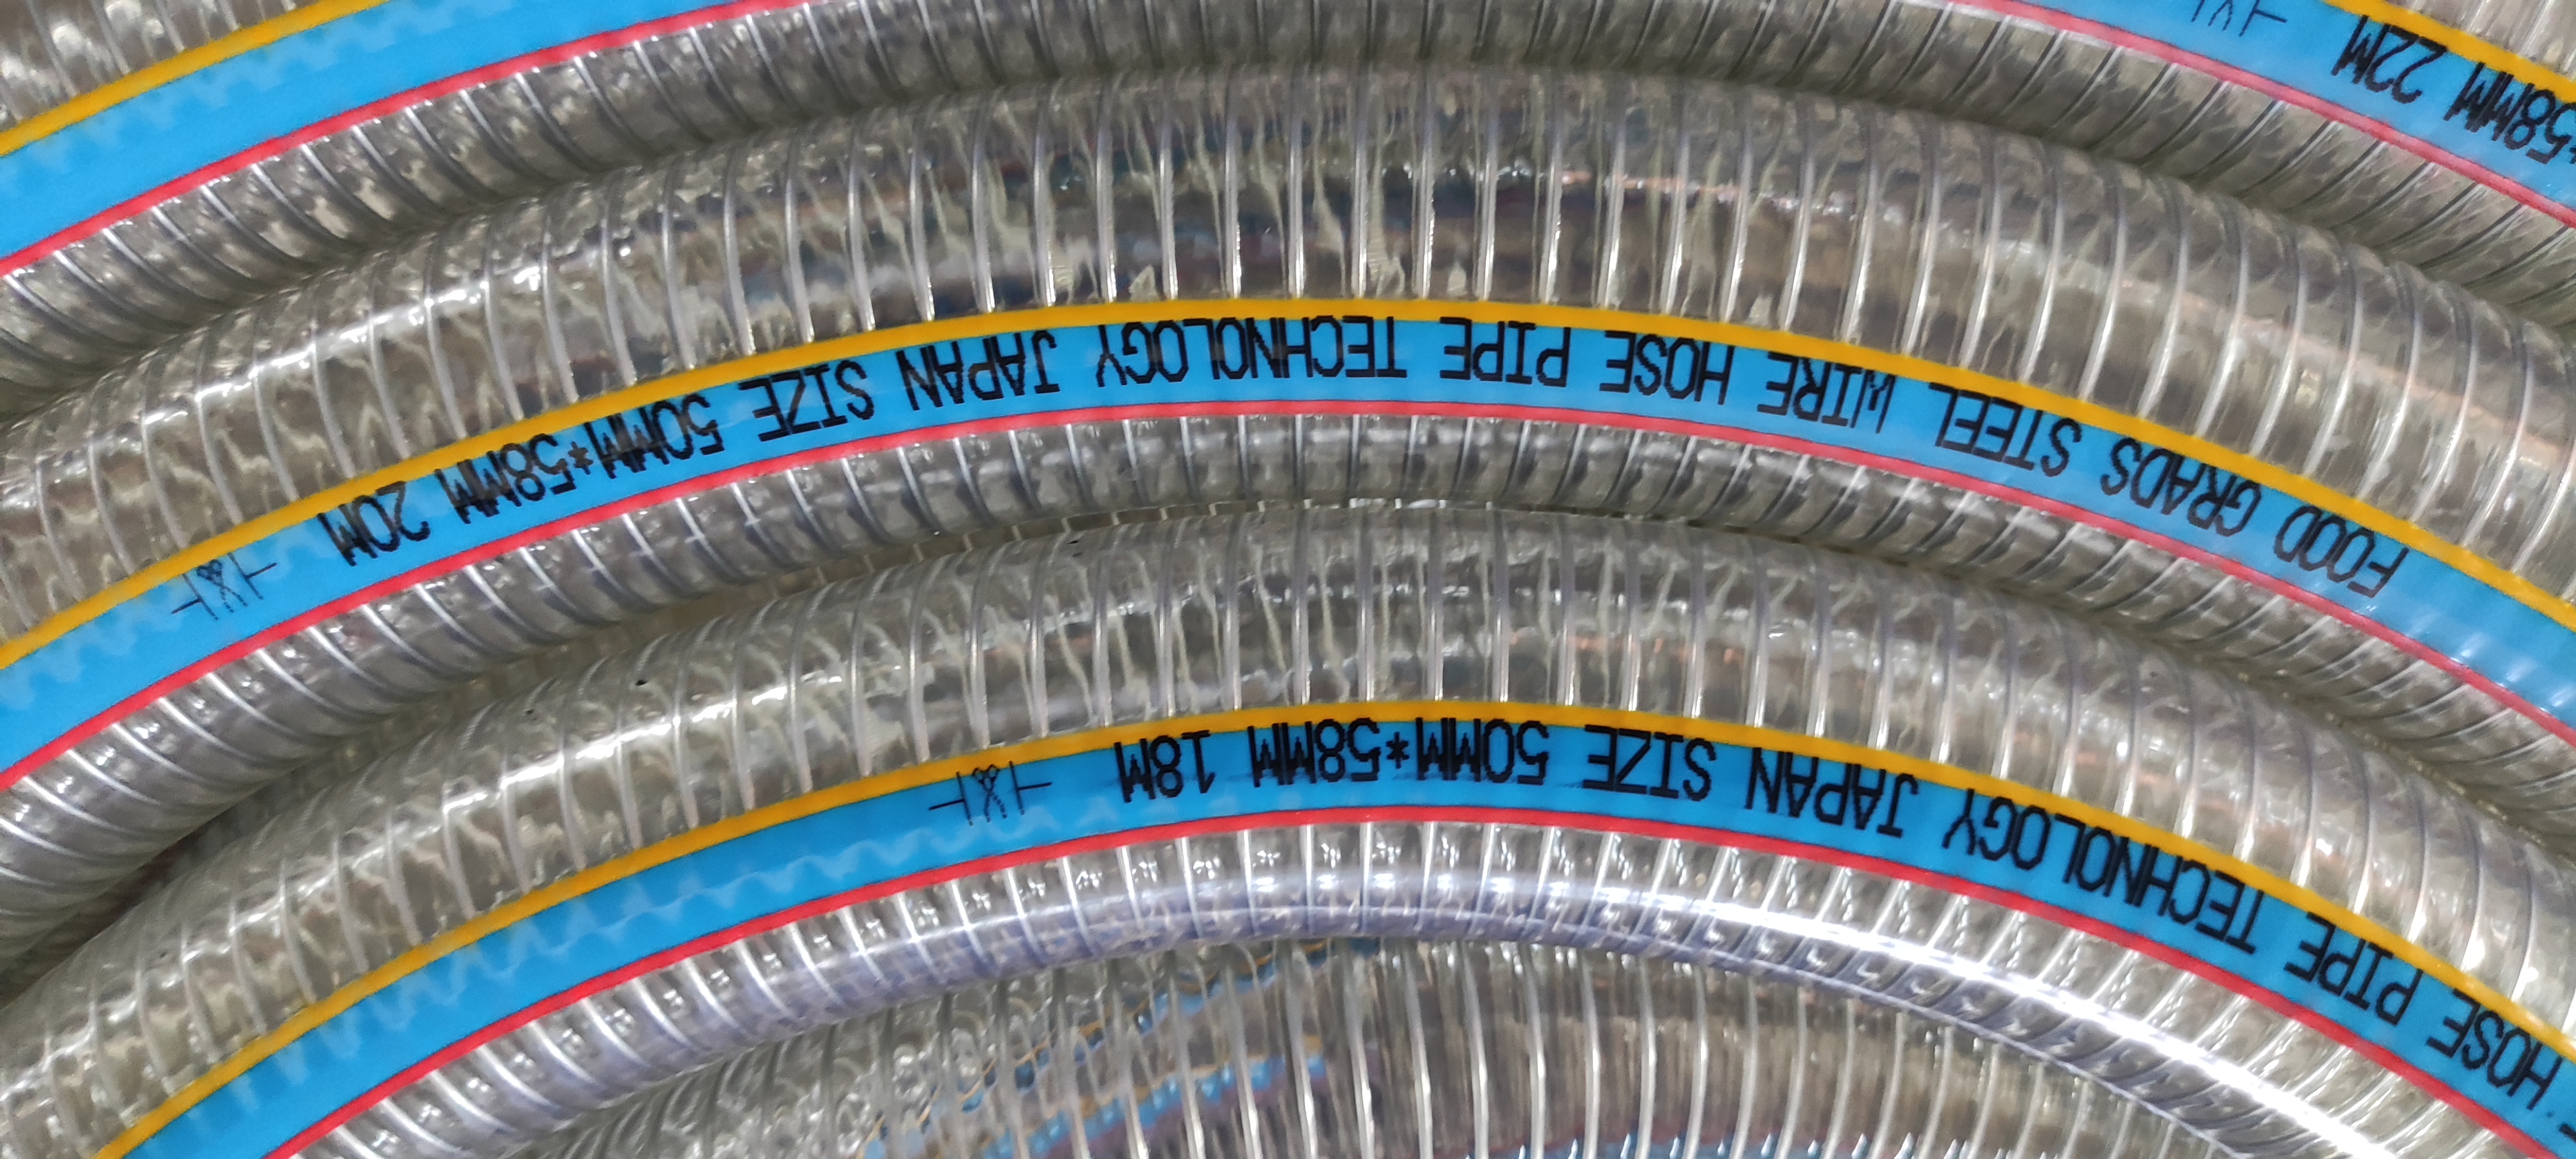 Do you know several commonly used PVC plastic hoses?